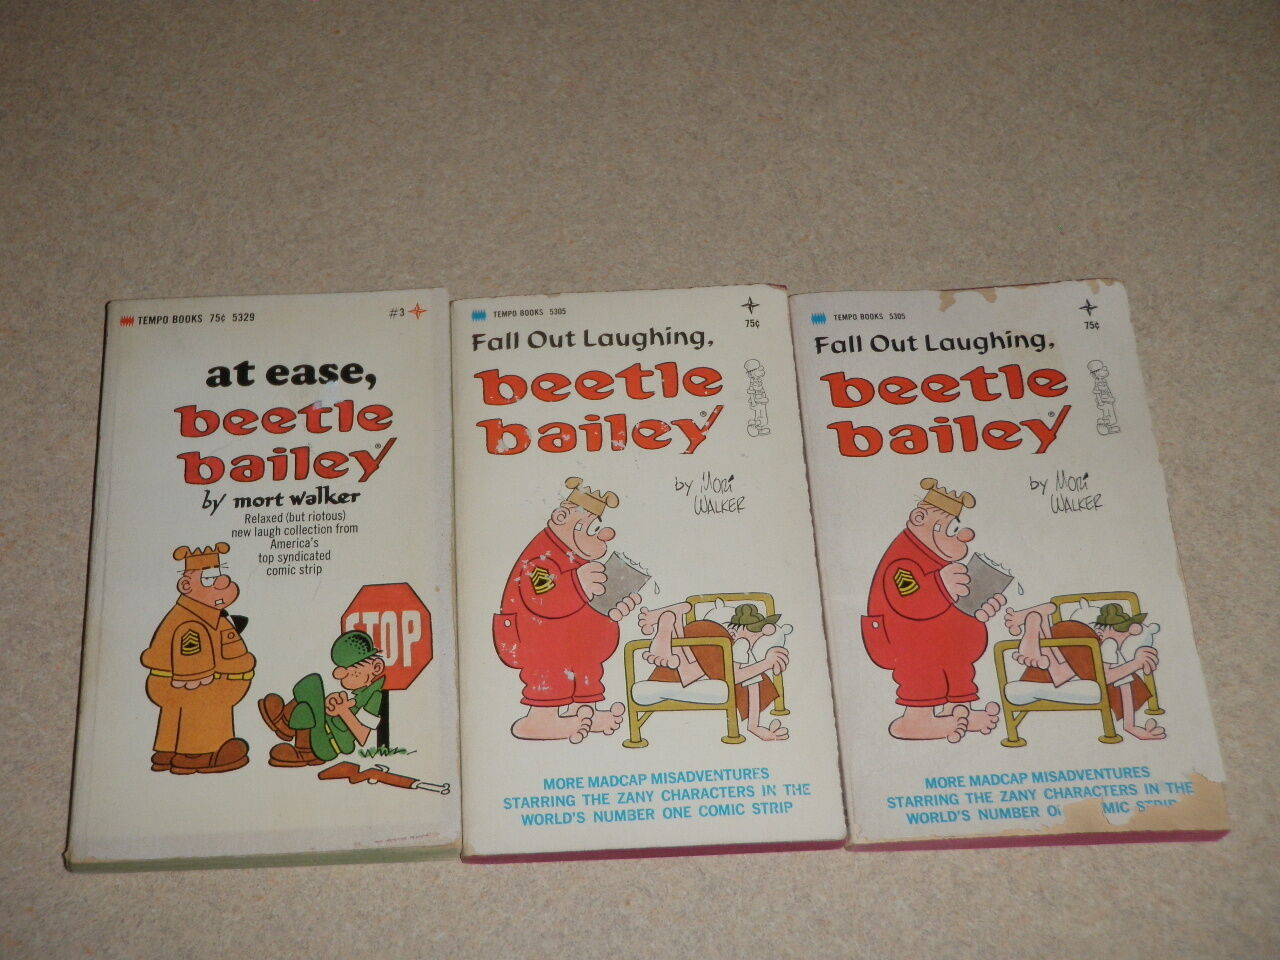 Vintage Beetle Bailey Book #3 1970 At Ease 1969 Fall Out Laughing By Mort Walker